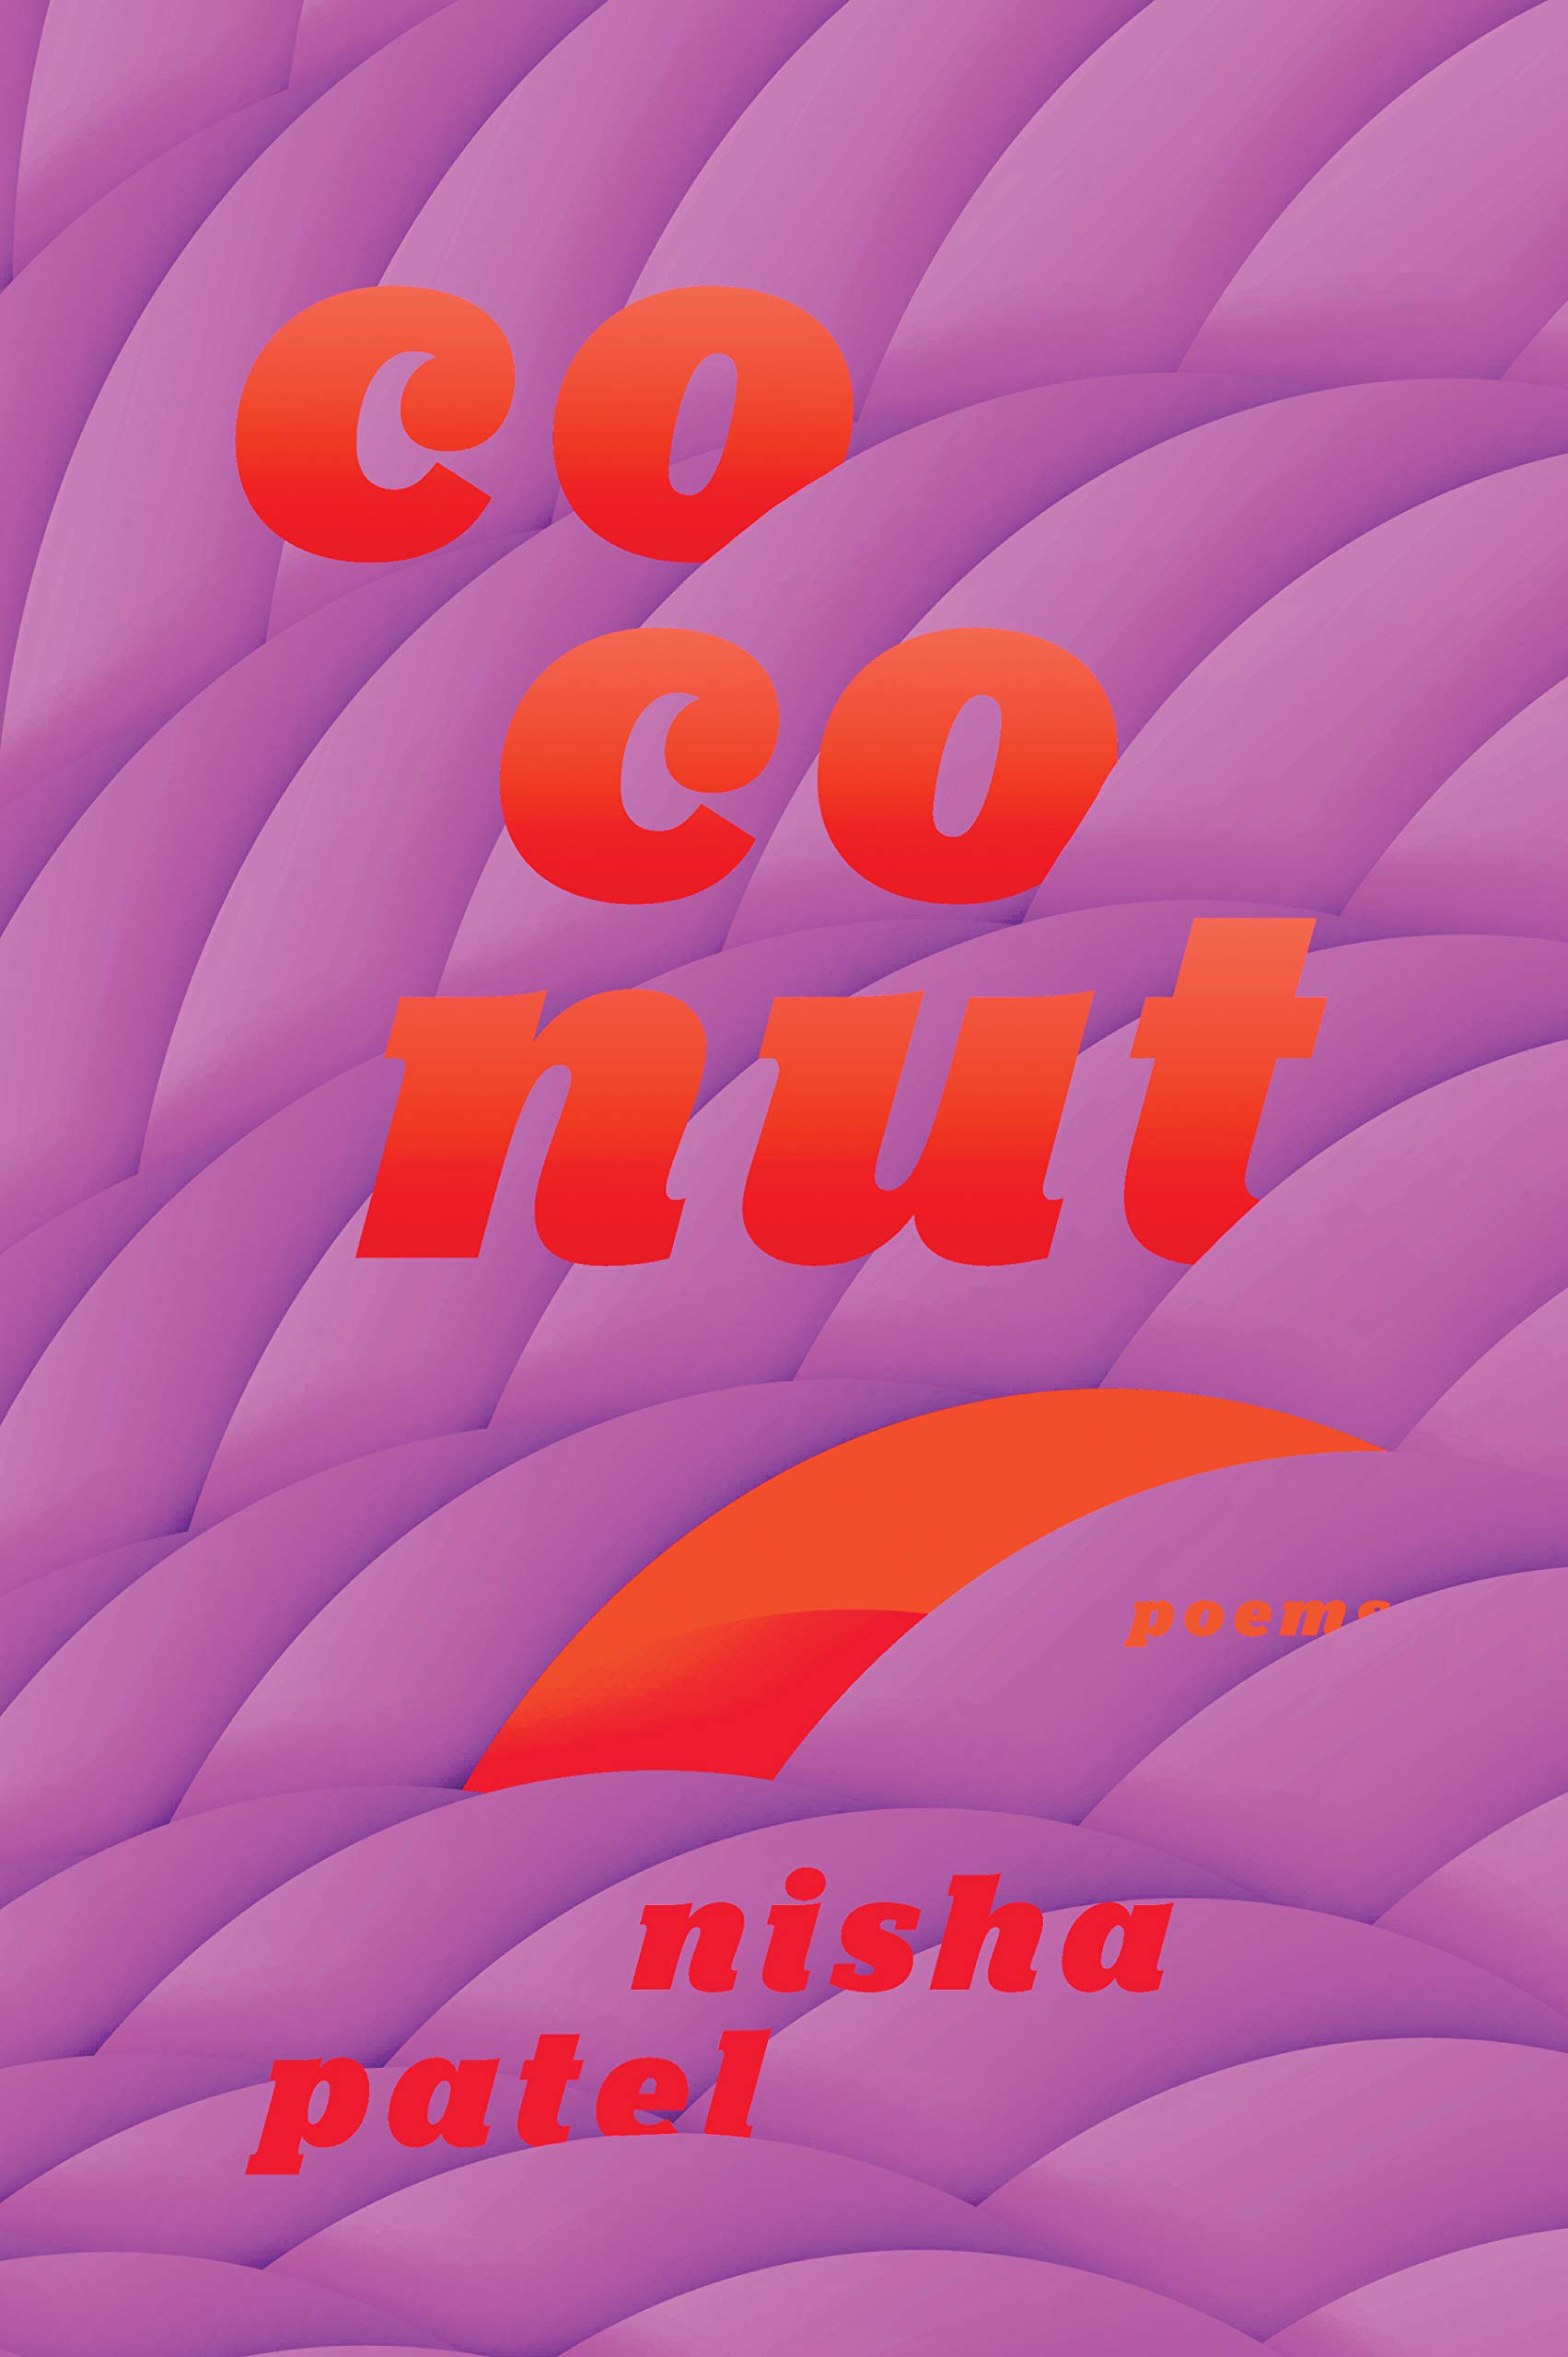 The cover of Coconut